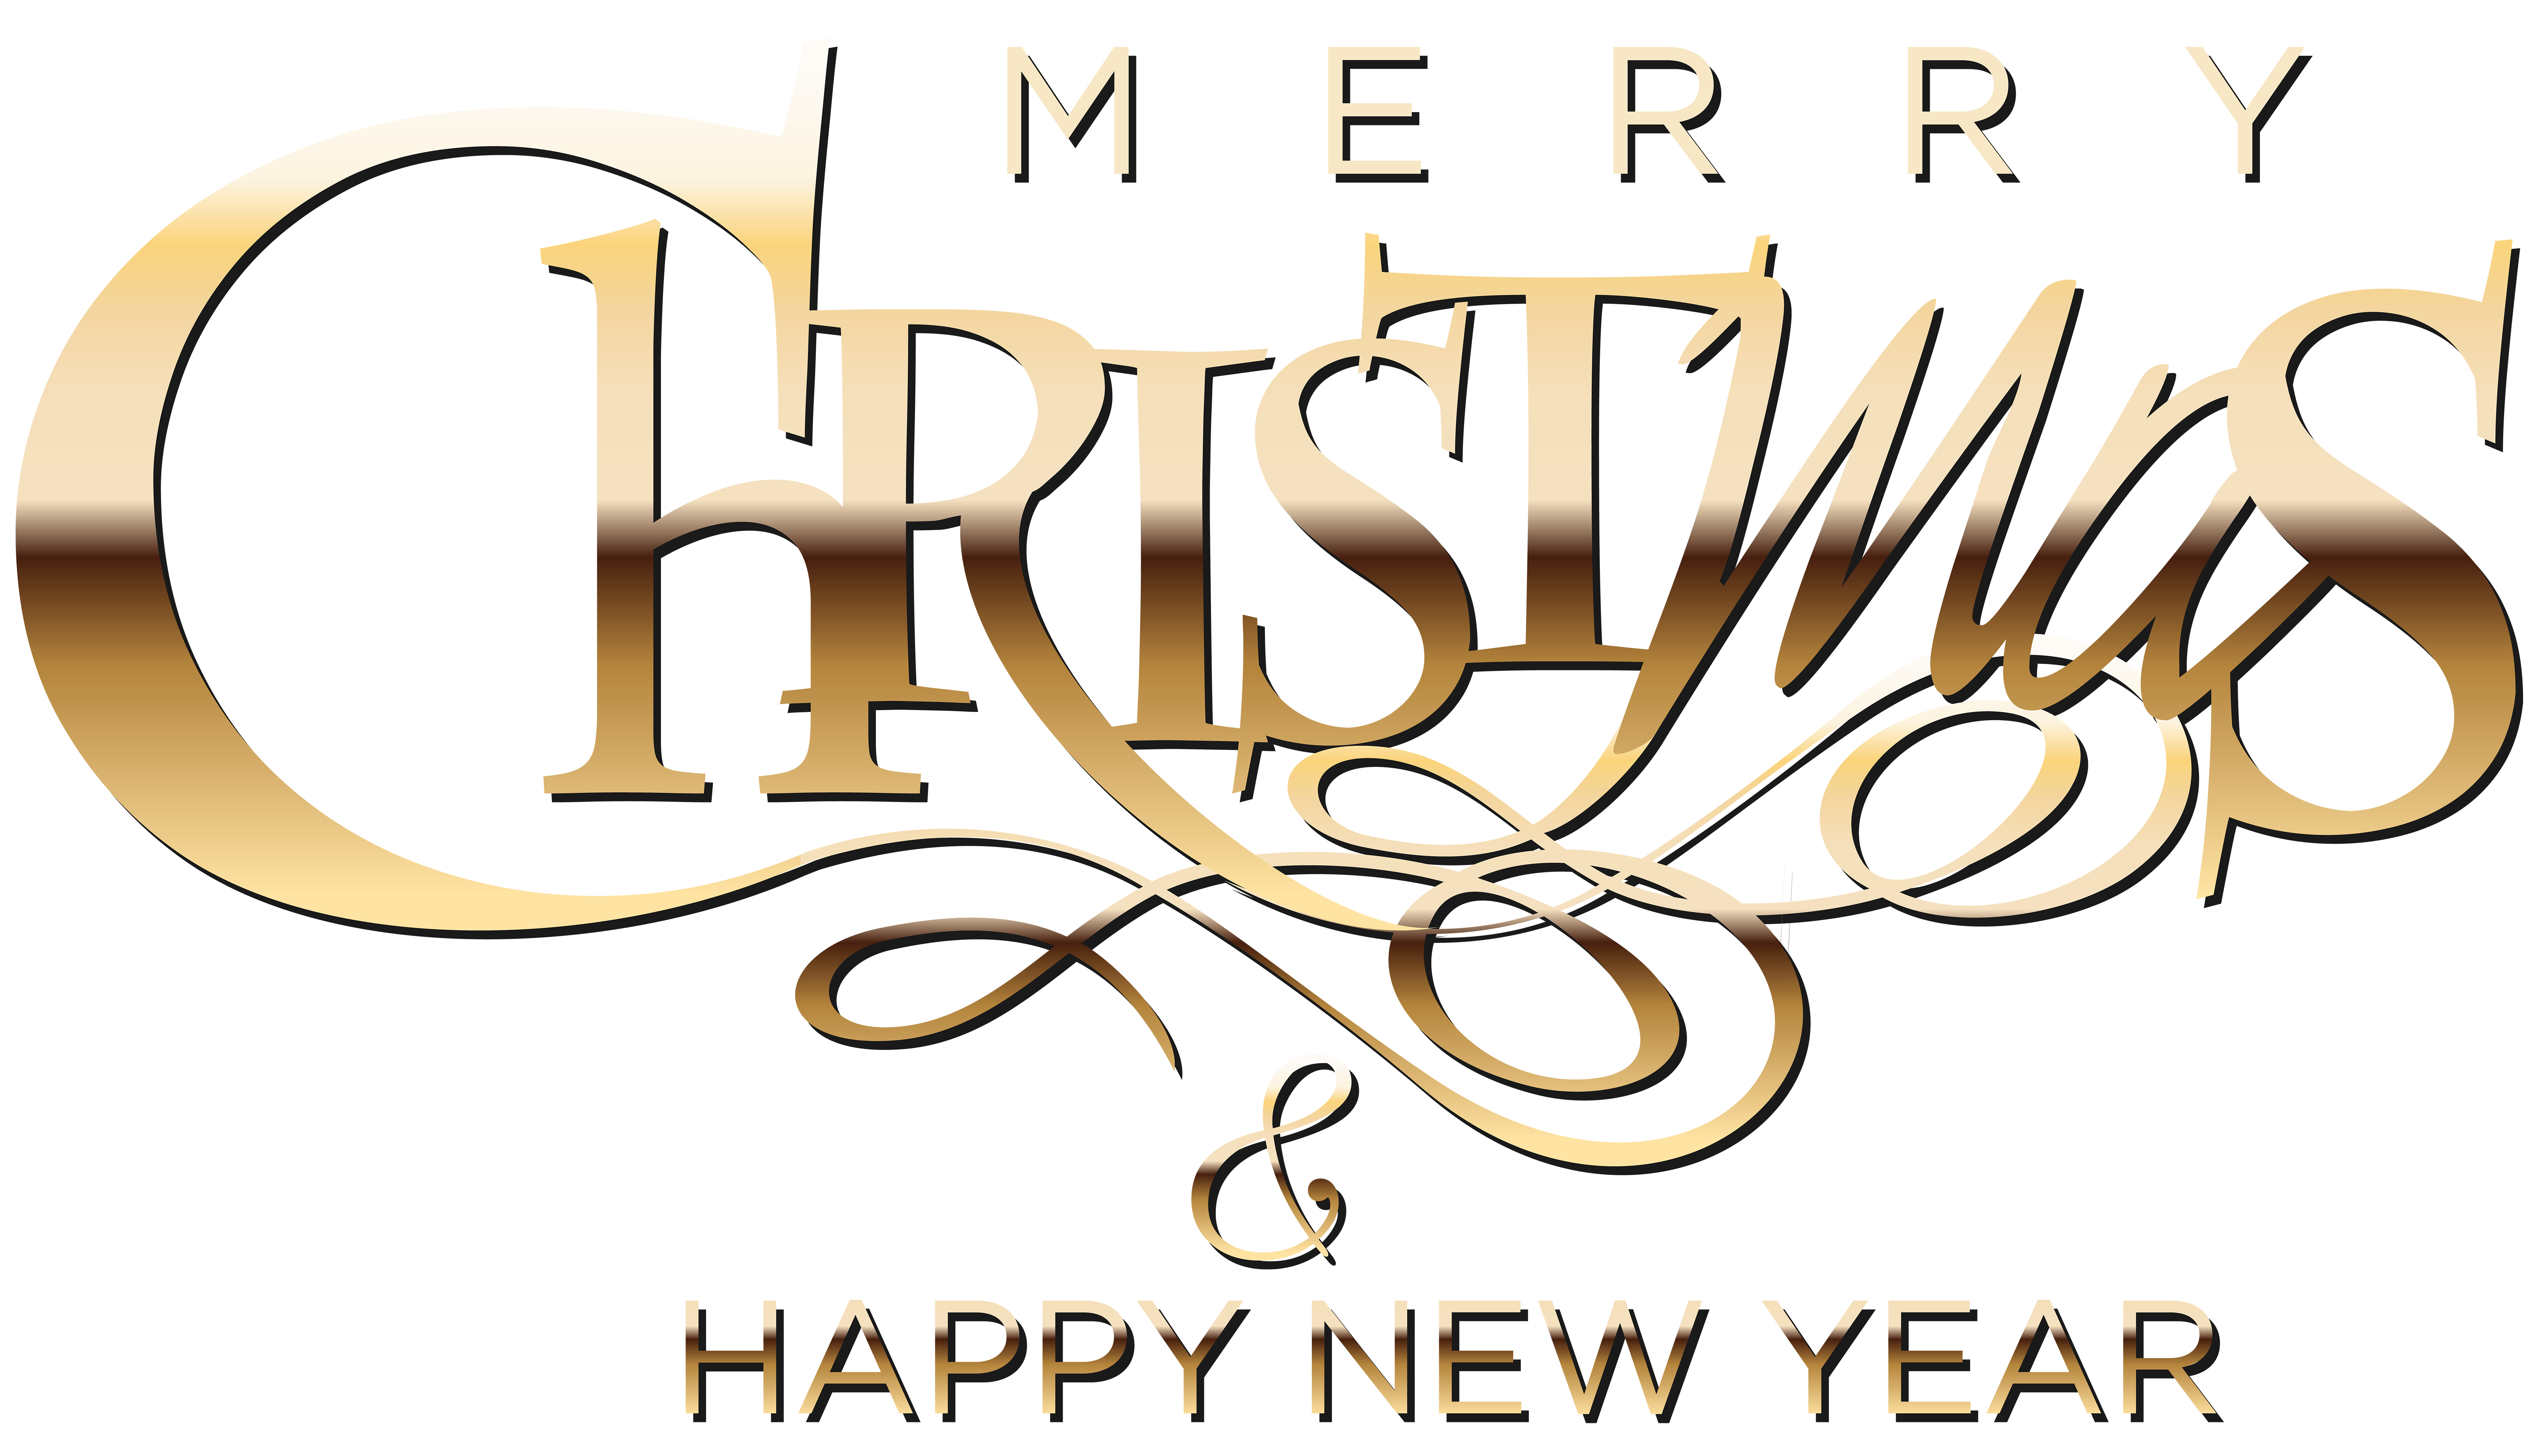 Merry Christmas And Happy New Year Text Png Exemple de Texte